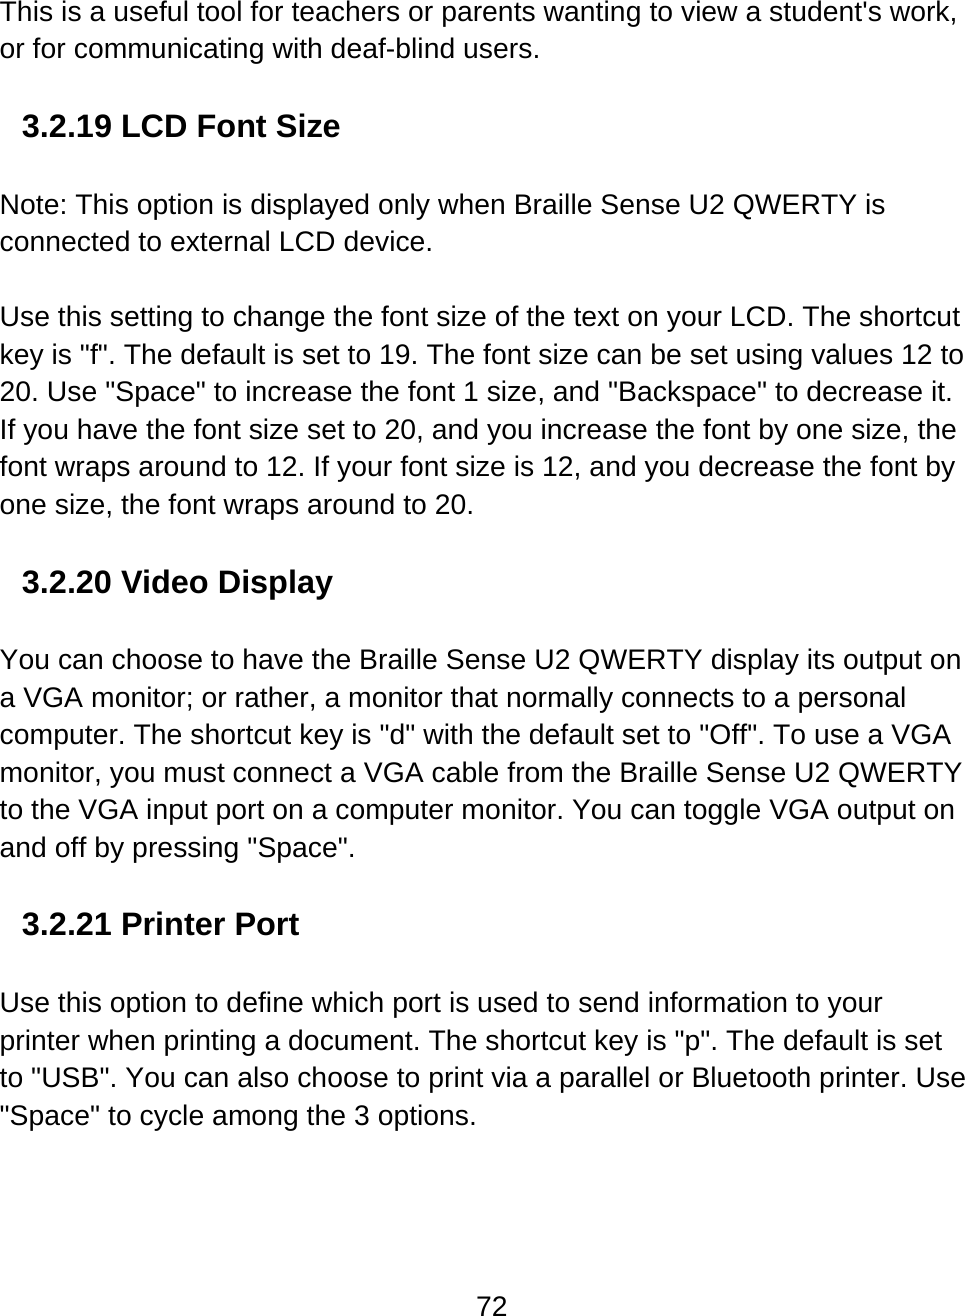 72  This is a useful tool for teachers or parents wanting to view a student&apos;s work, or for communicating with deaf-blind users.     3.2.19 LCD Font Size  Note: This option is displayed only when Braille Sense U2 QWERTY is connected to external LCD device.  Use this setting to change the font size of the text on your LCD. The shortcut key is &quot;f&quot;. The default is set to 19. The font size can be set using values 12 to 20. Use &quot;Space&quot; to increase the font 1 size, and &quot;Backspace&quot; to decrease it. If you have the font size set to 20, and you increase the font by one size, the font wraps around to 12. If your font size is 12, and you decrease the font by one size, the font wraps around to 20.  3.2.20 Video Display  You can choose to have the Braille Sense U2 QWERTY display its output on a VGA monitor; or rather, a monitor that normally connects to a personal computer. The shortcut key is &quot;d&quot; with the default set to &quot;Off&quot;. To use a VGA monitor, you must connect a VGA cable from the Braille Sense U2 QWERTY to the VGA input port on a computer monitor. You can toggle VGA output on and off by pressing &quot;Space&quot;.   3.2.21 Printer Port  Use this option to define which port is used to send information to your printer when printing a document. The shortcut key is &quot;p&quot;. The default is set to &quot;USB&quot;. You can also choose to print via a parallel or Bluetooth printer. Use &quot;Space&quot; to cycle among the 3 options.  